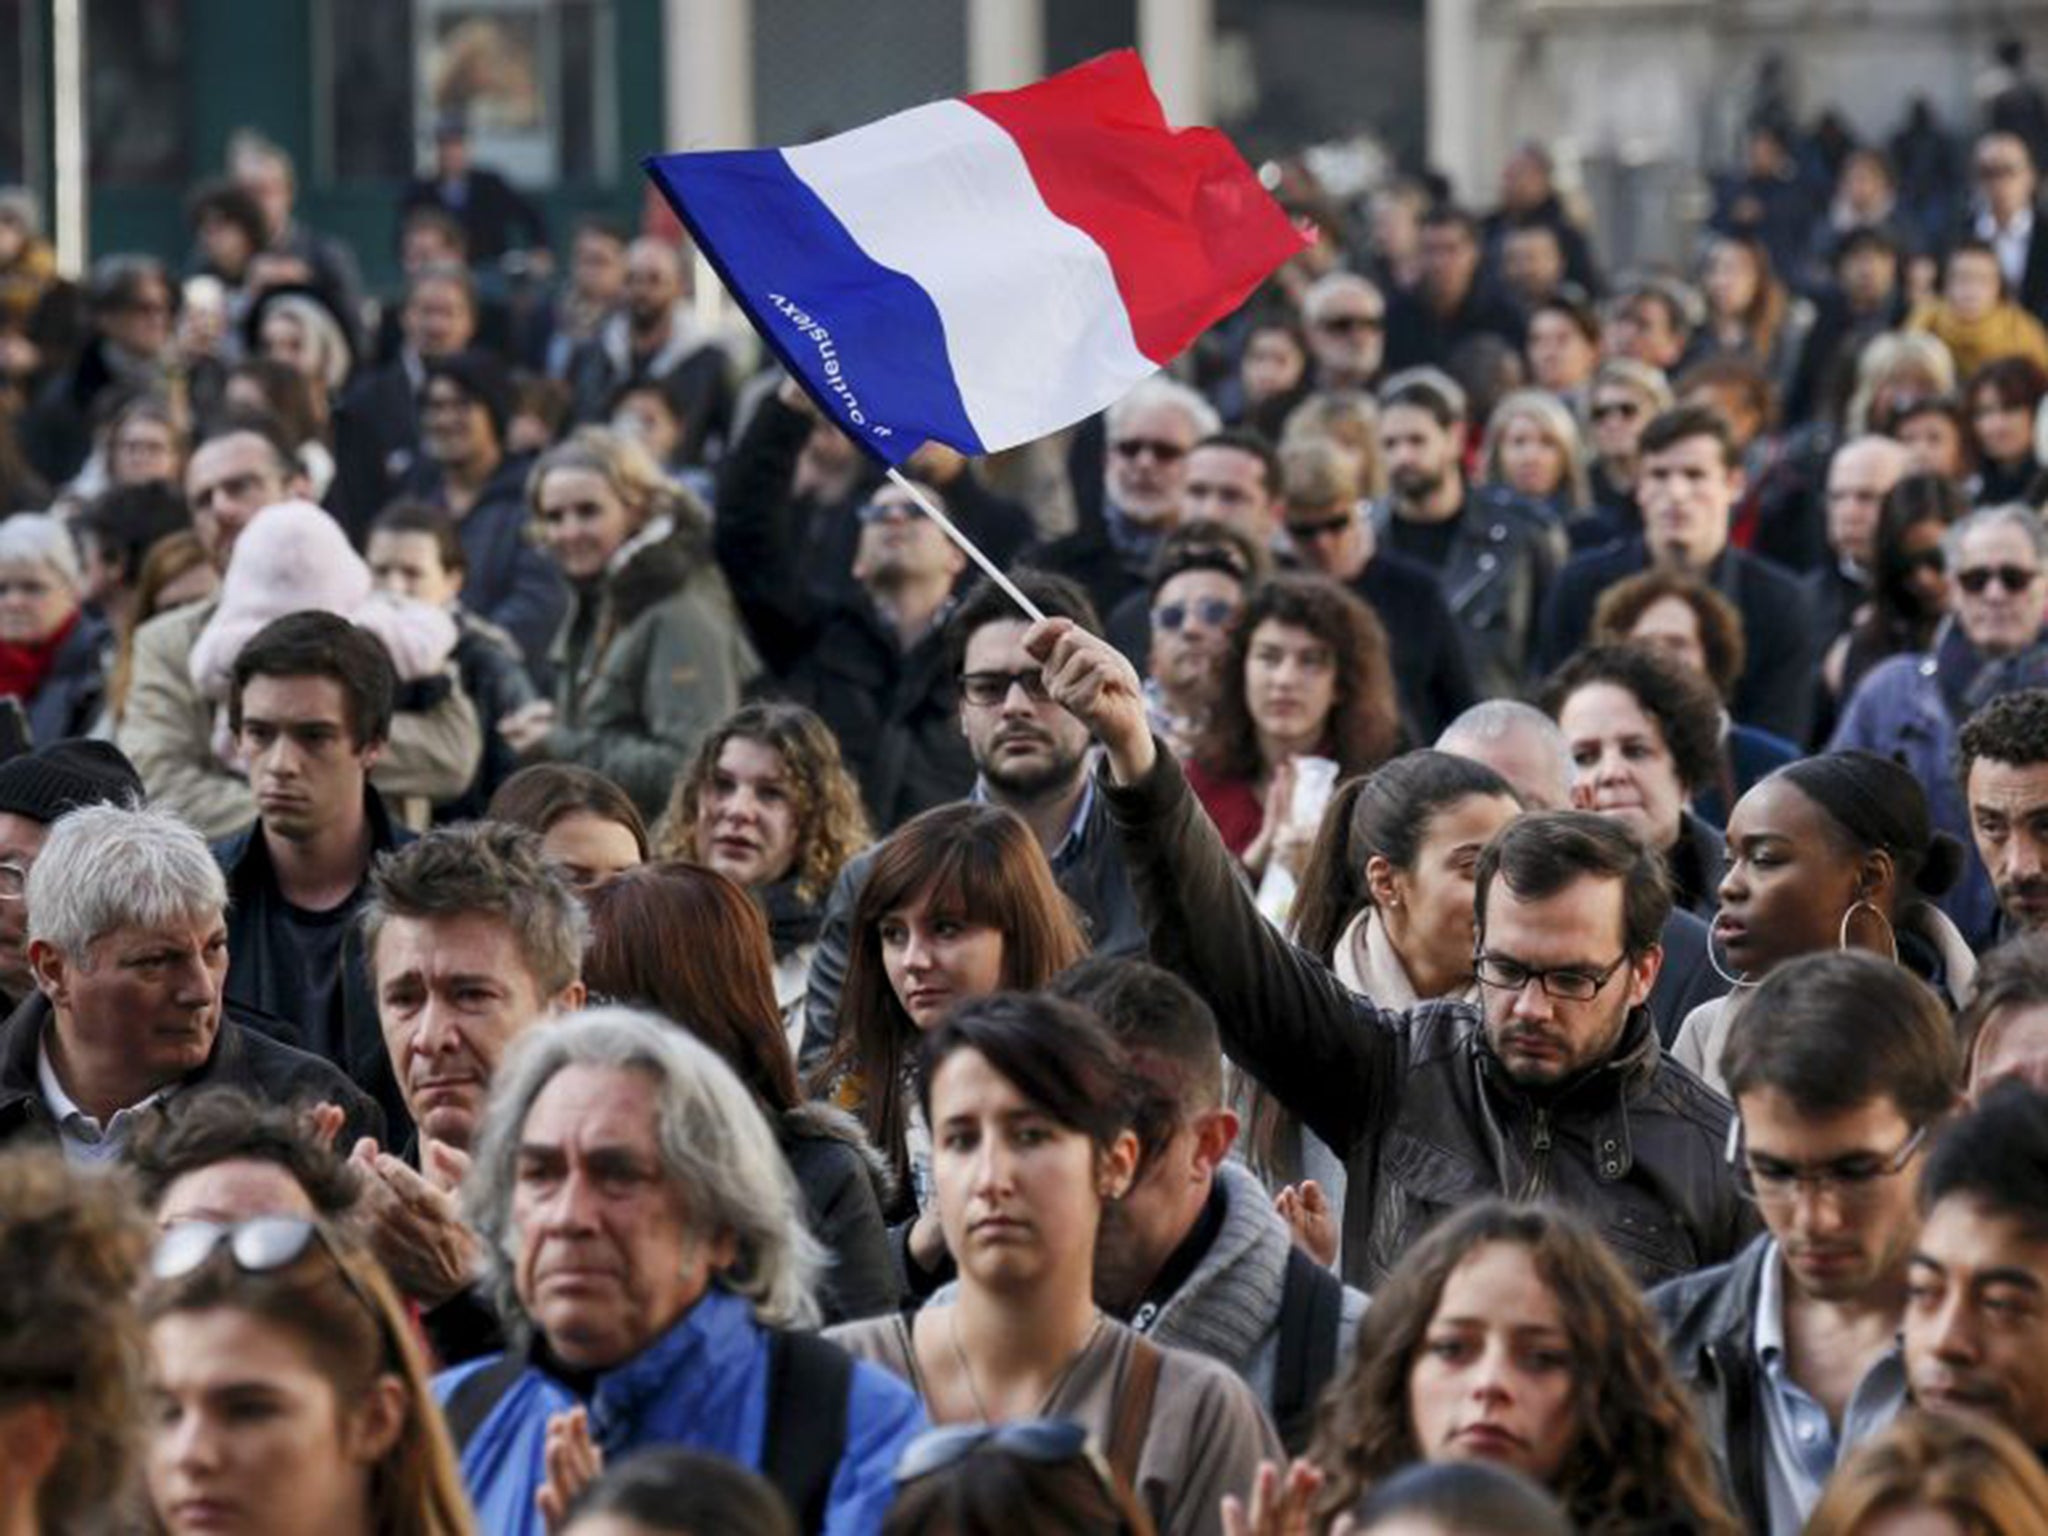 A minute's silence to pay tribute to the victims of the series of deadly attacks in Paris was observed all over France, including in Lyon